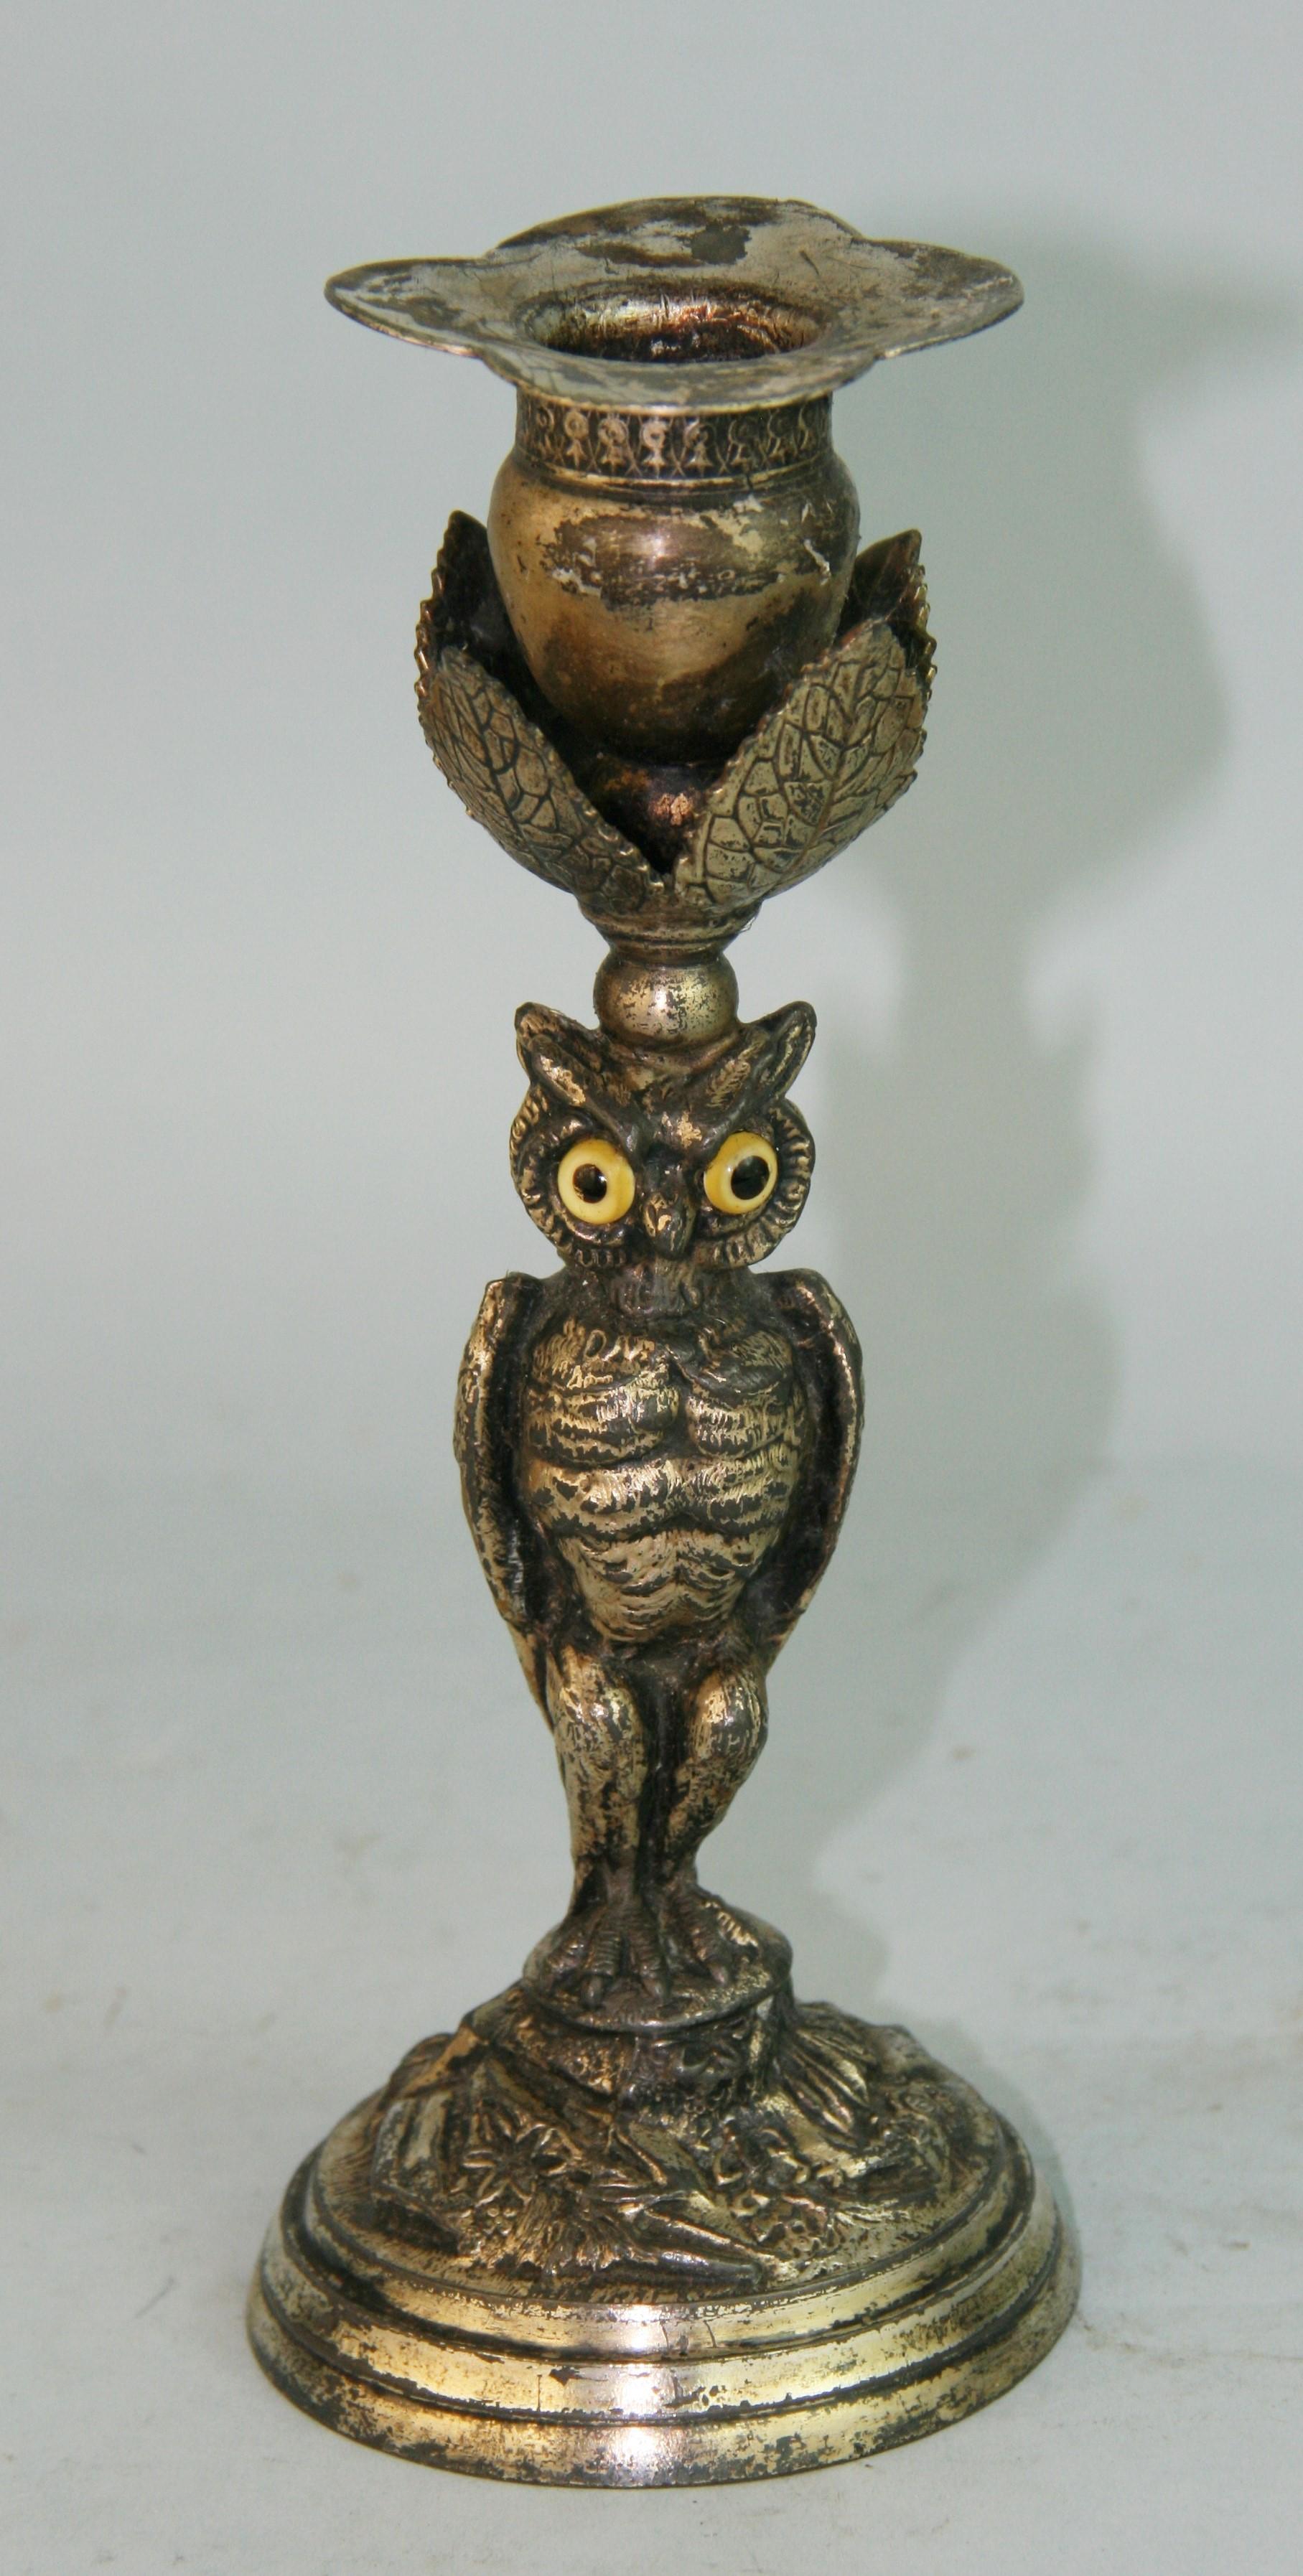 1200 Hand crafted silver plated miniature owl candle holder with glass eyes.
Manufactured in Boston by J.W.Tufts 1875 to 1915.